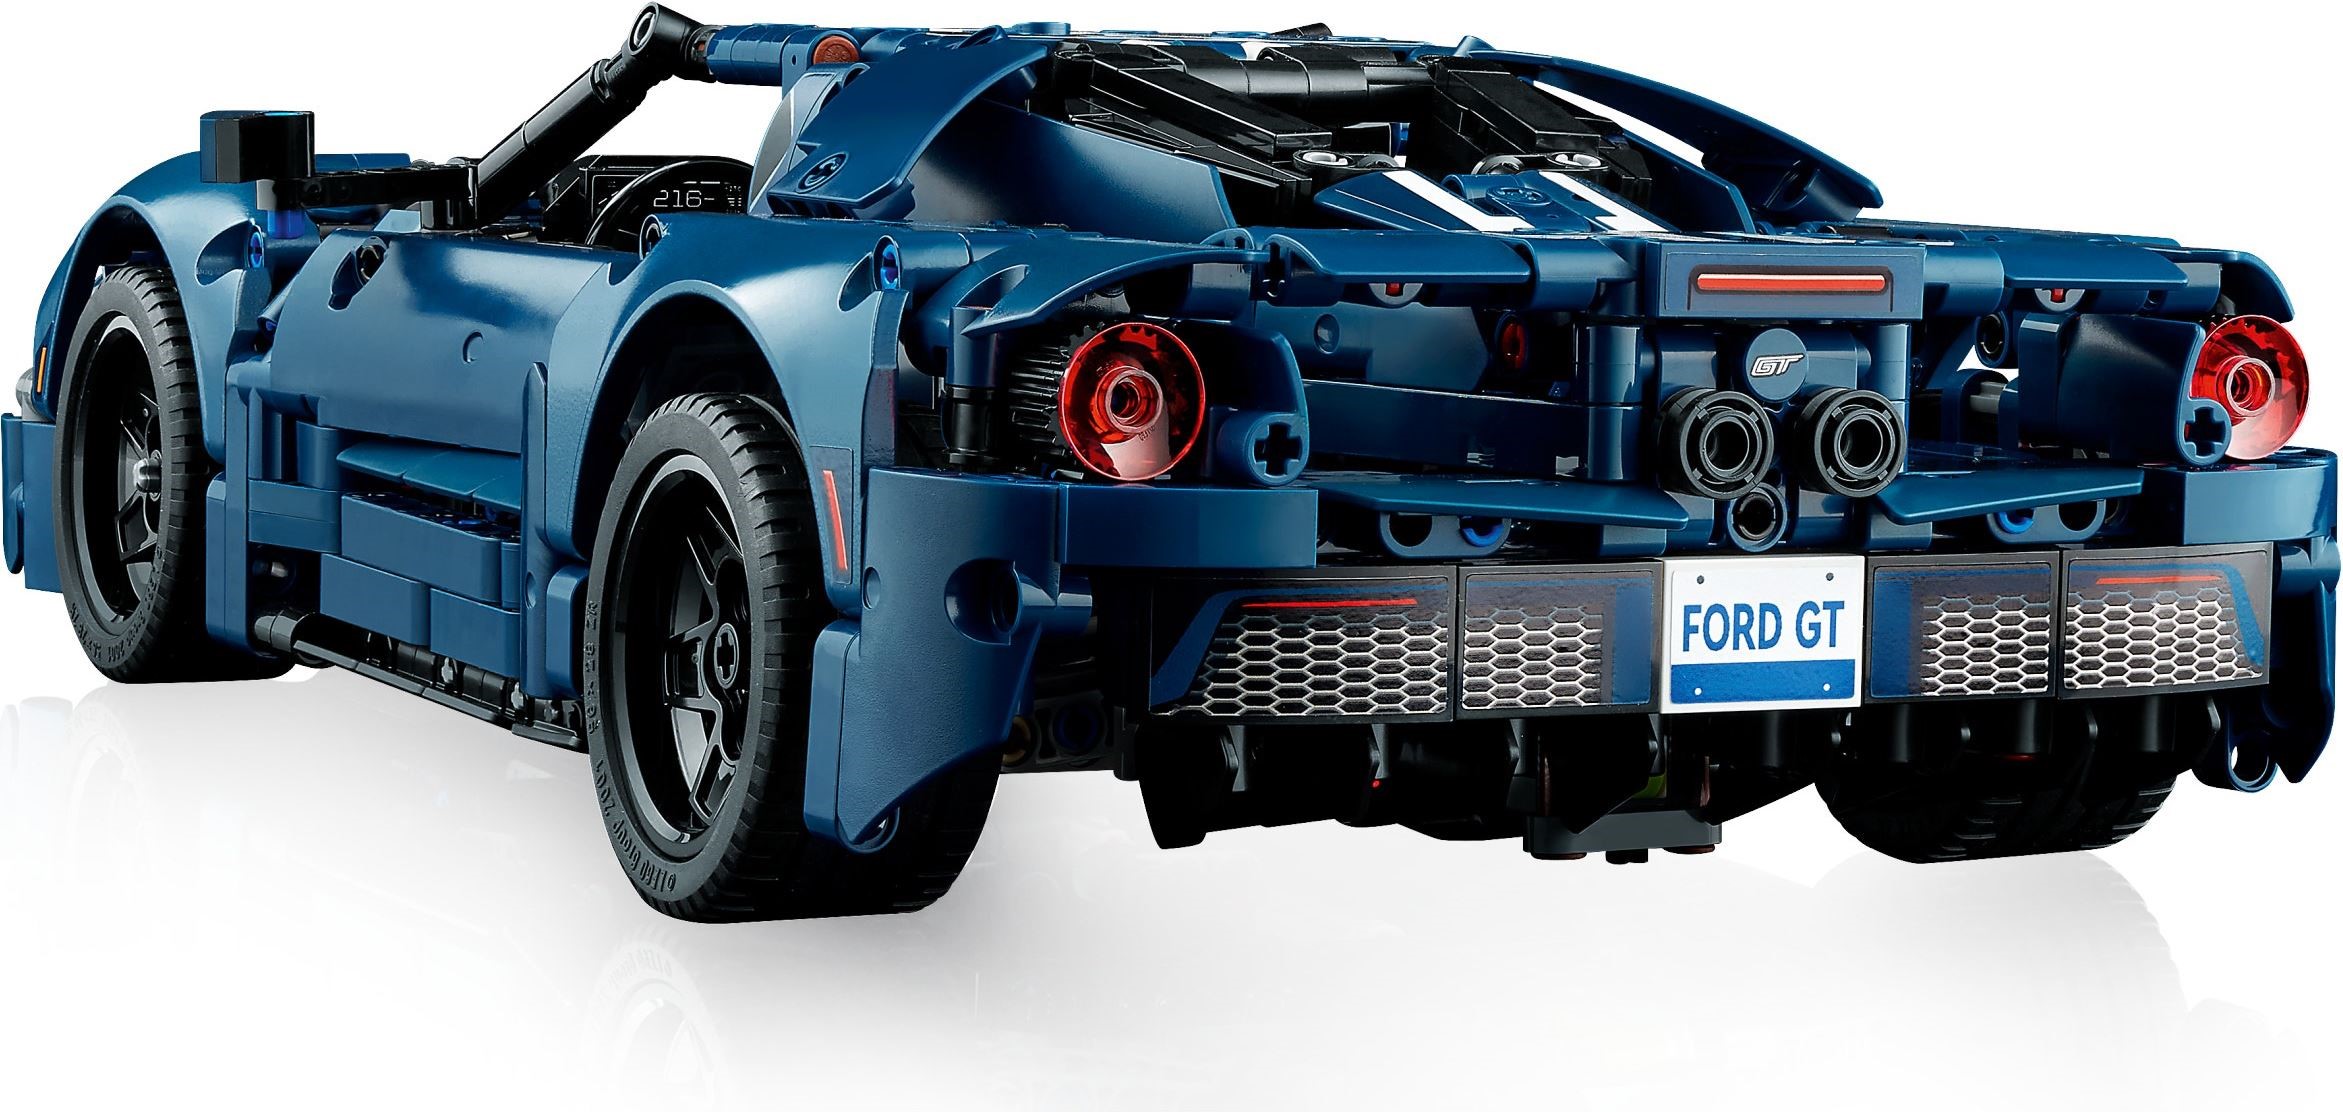 Lego (R) Technic new product information